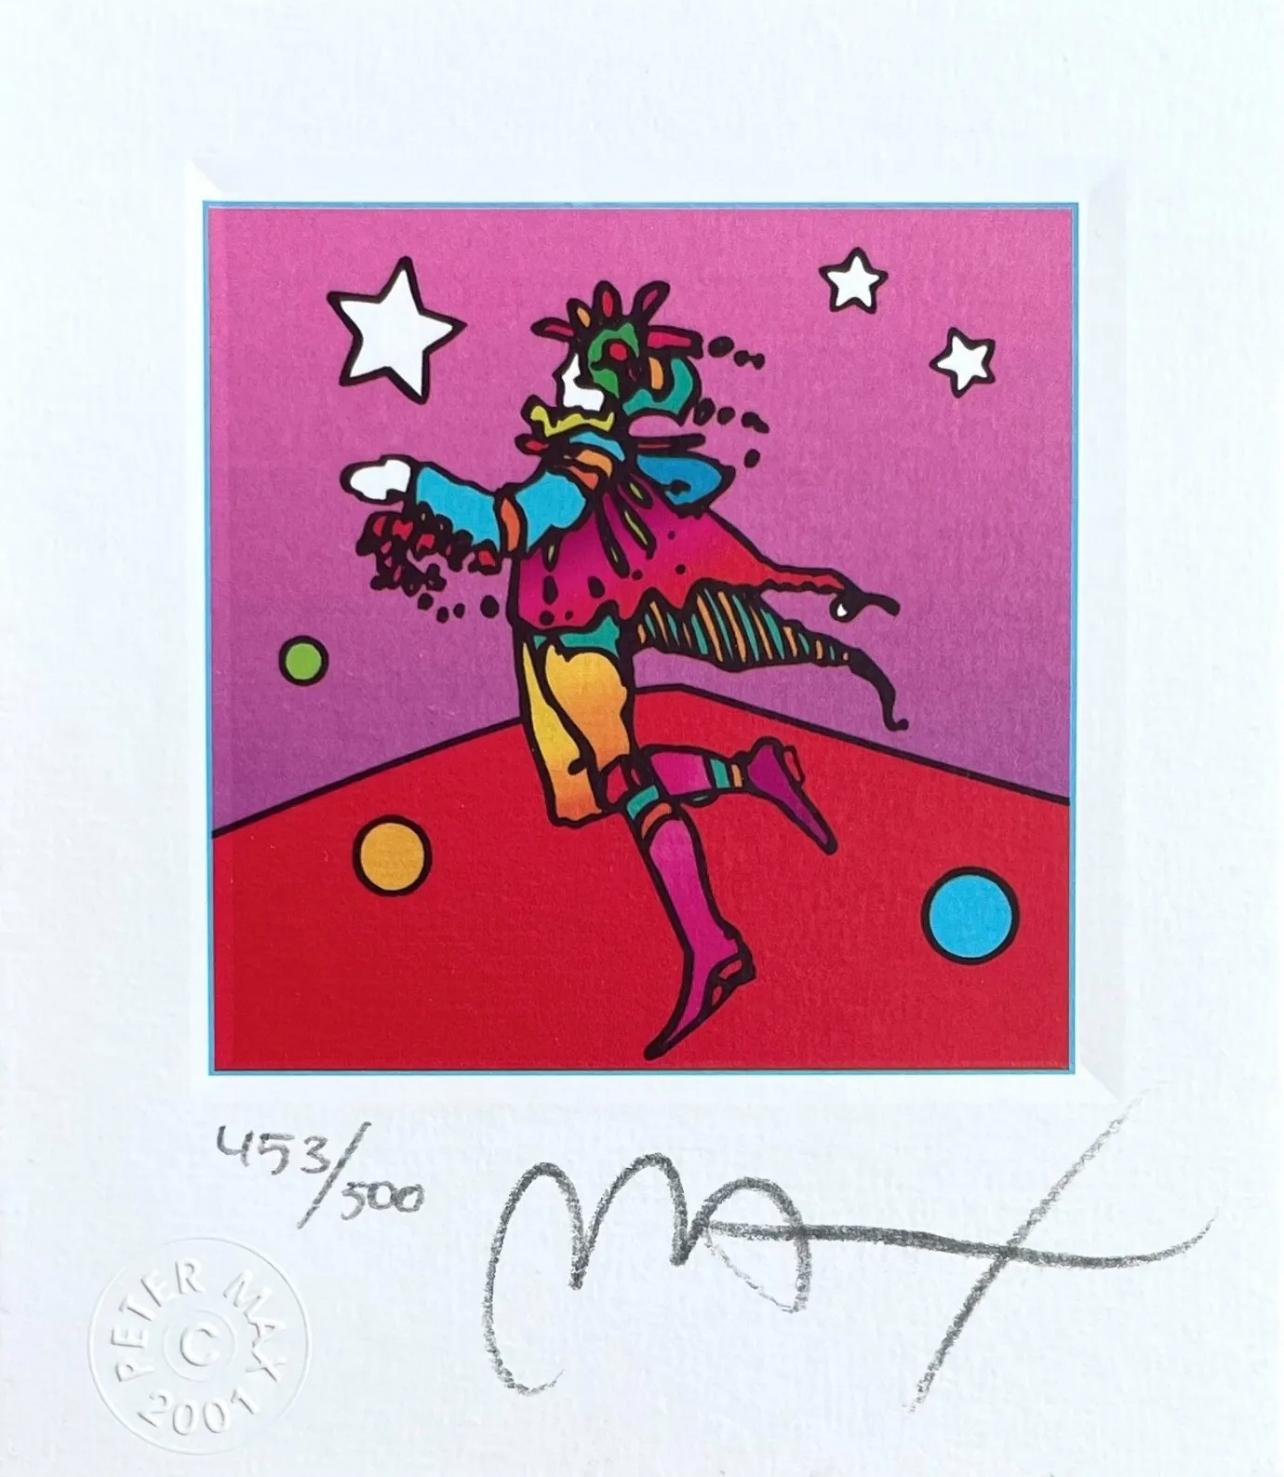 Artist: Peter Max (1937)
Title: Star Catcher
Year: 2003
Edition: 453/500, plus proofs
Medium: Lithograph on Lustro Saxony paper
Size: 3.43 x 2.62 inches
Condition: Excellent
Inscription: Signed and numbered by the artist.
Notes: Published by Via